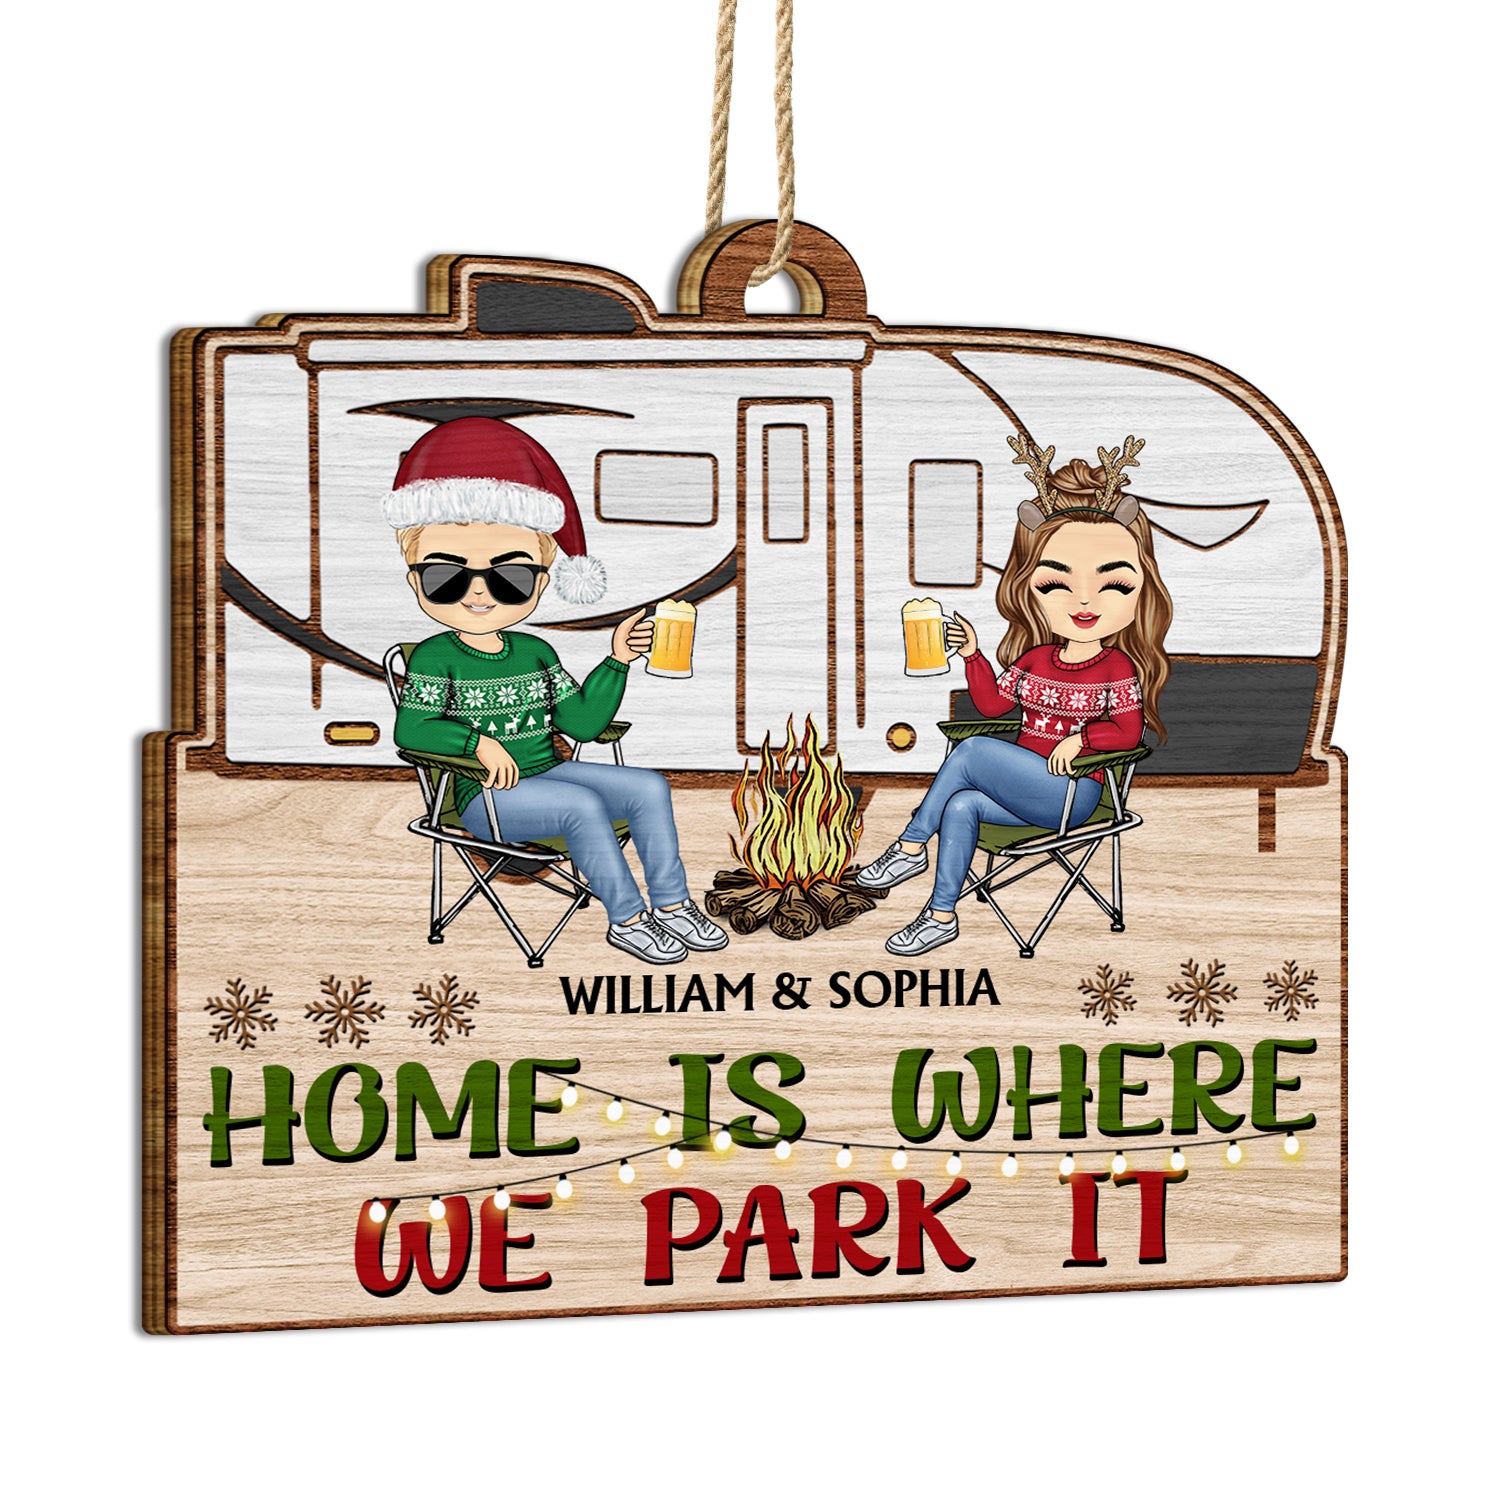 Home Is Where We Park It - Christmas Gifts For Couples, Camping Lovers - Personalized Custom Shaped Wooden Ornament